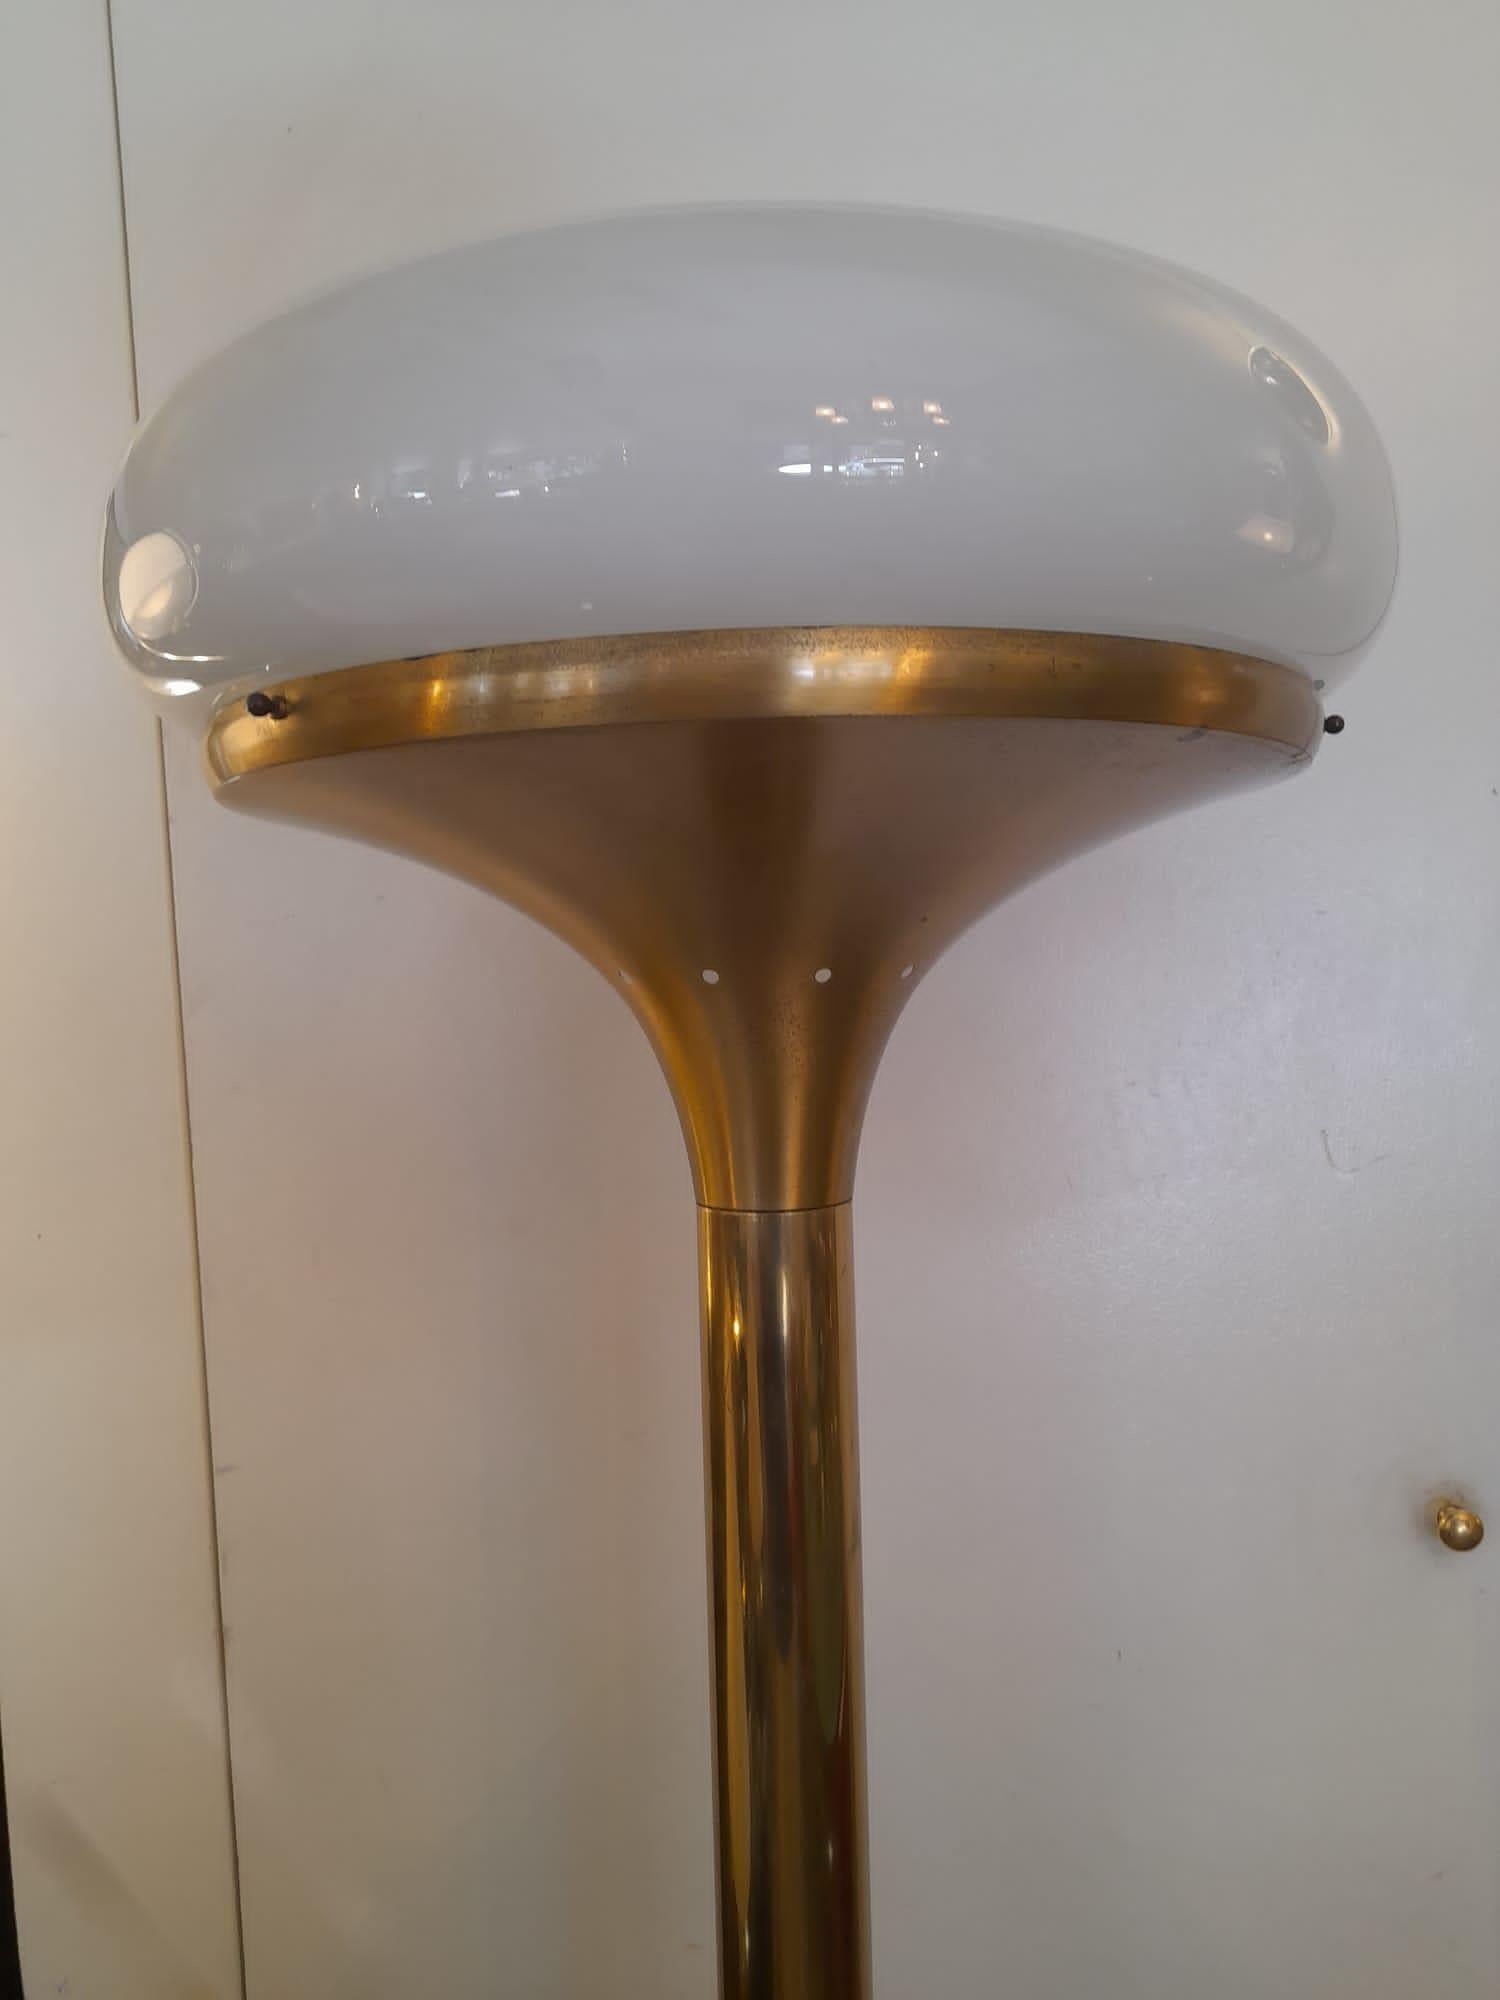 Italian 1970s brass and white glass lampshade floor lamp.
Original wiring system, original foot button. 
This lamp features a white rounded glass which is in perfect conditions: no cracks. The brass of the structure shows some wears and signs